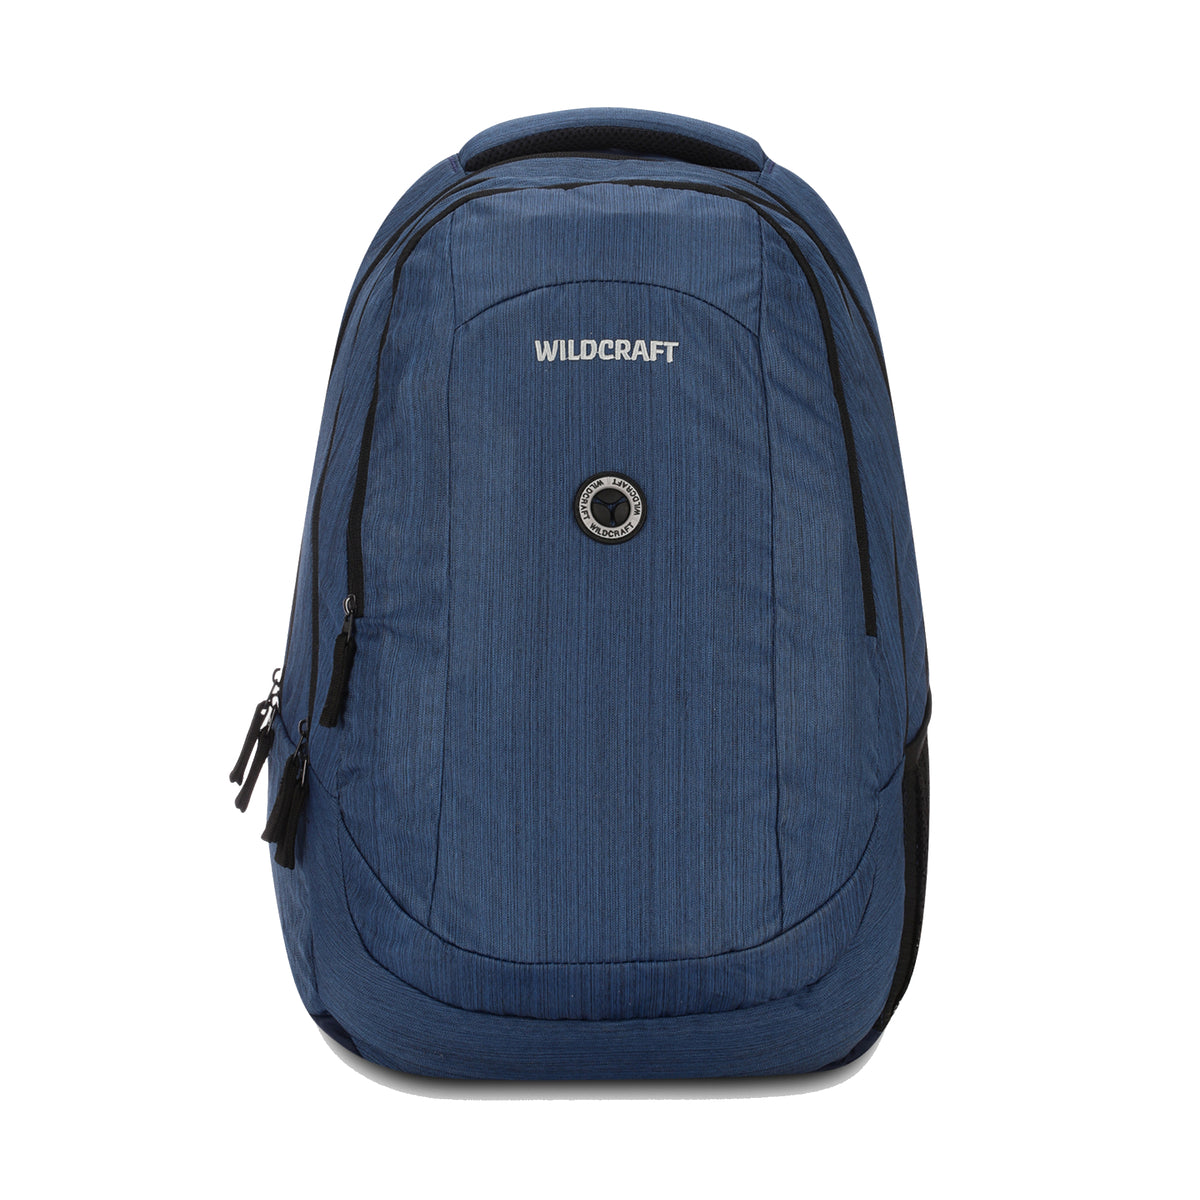 Wildcraft Wild Pac Xp3 Navy 19" Laptop Backpack, WILDPAC XP3NVY